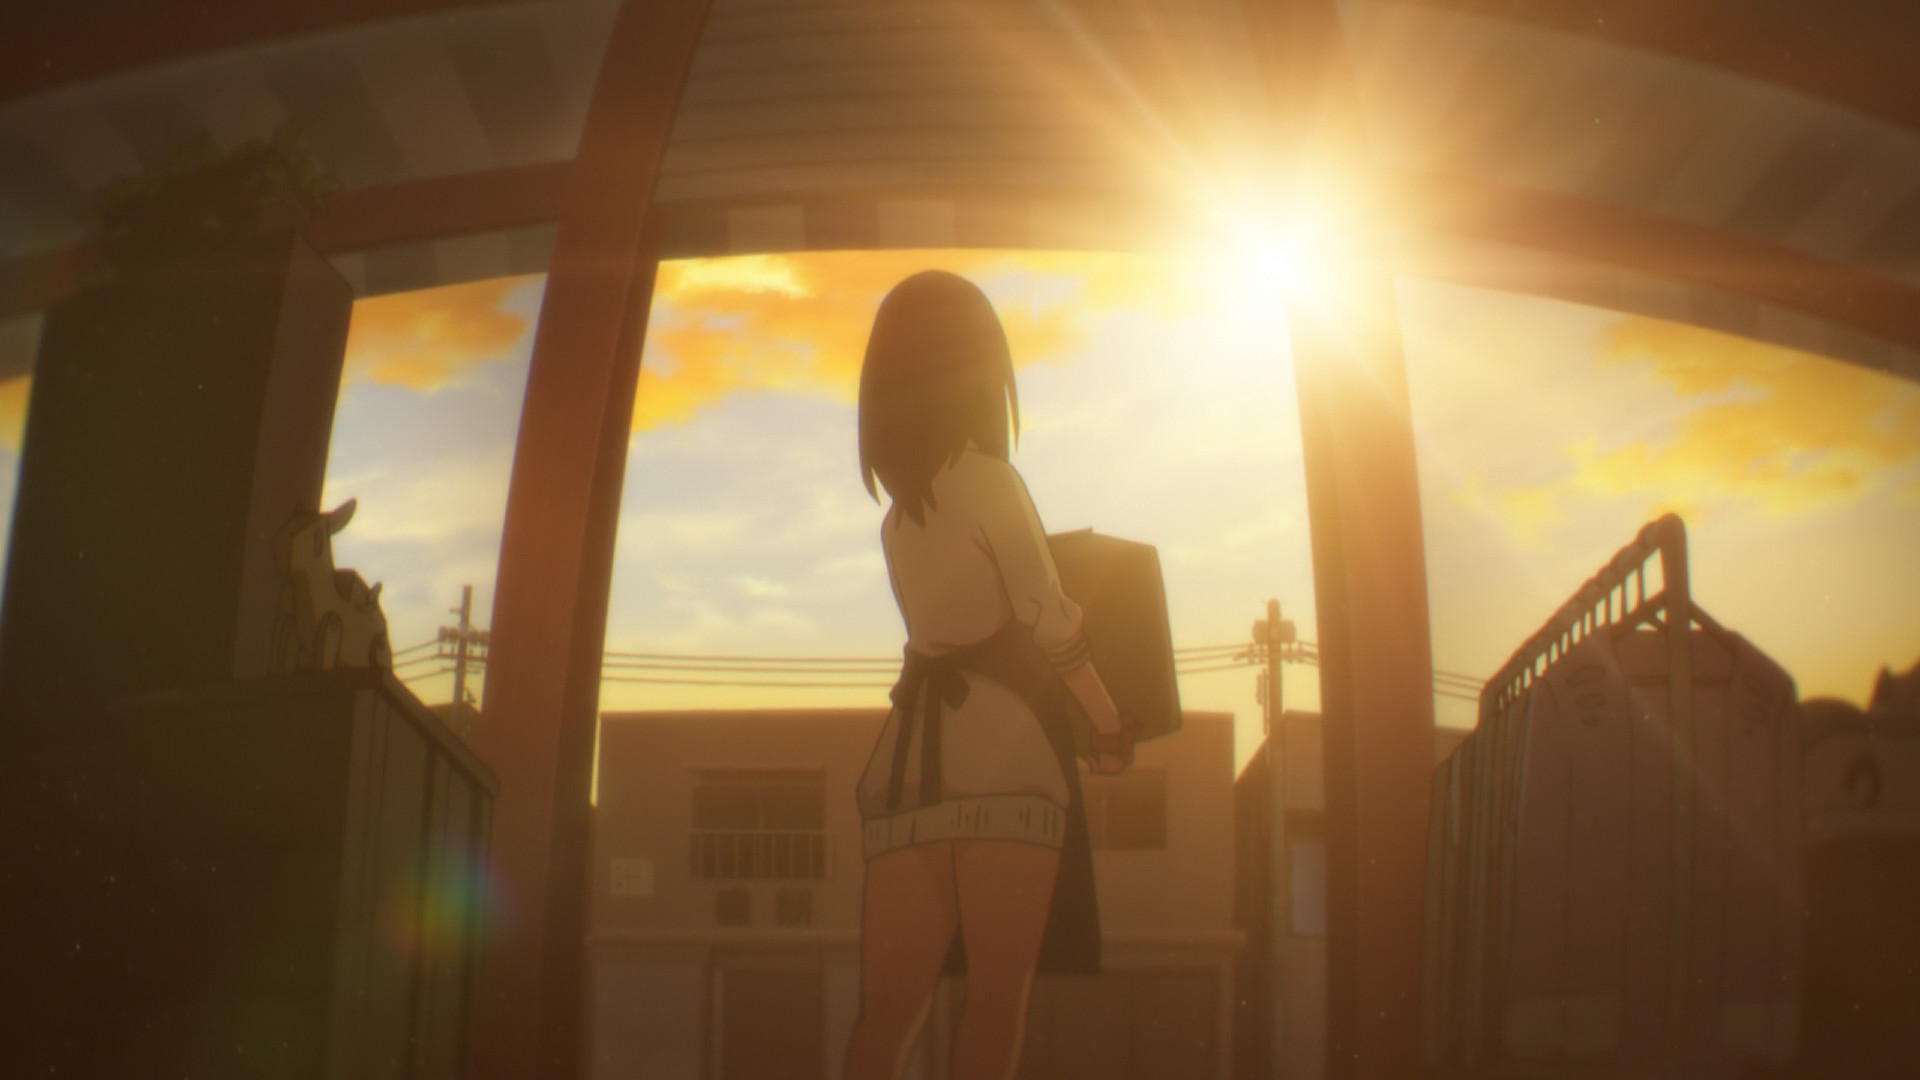 Rikka looks out into the sunset